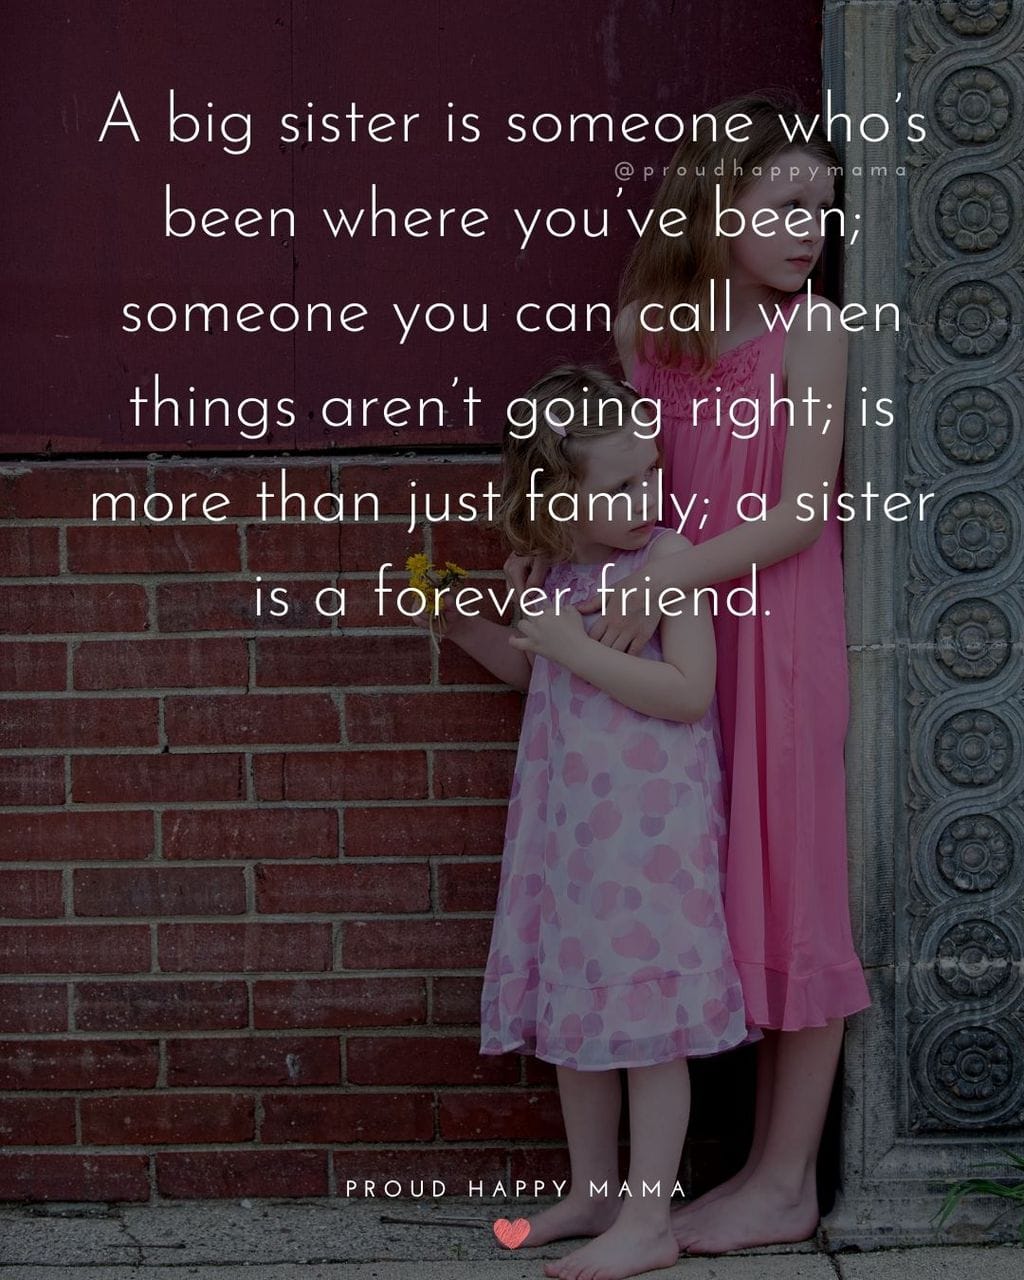 Sister Quotes - A big sister is someone whos been where youve been; someone you can call when things arent going right, is more than just family, a sister is a forever friend.